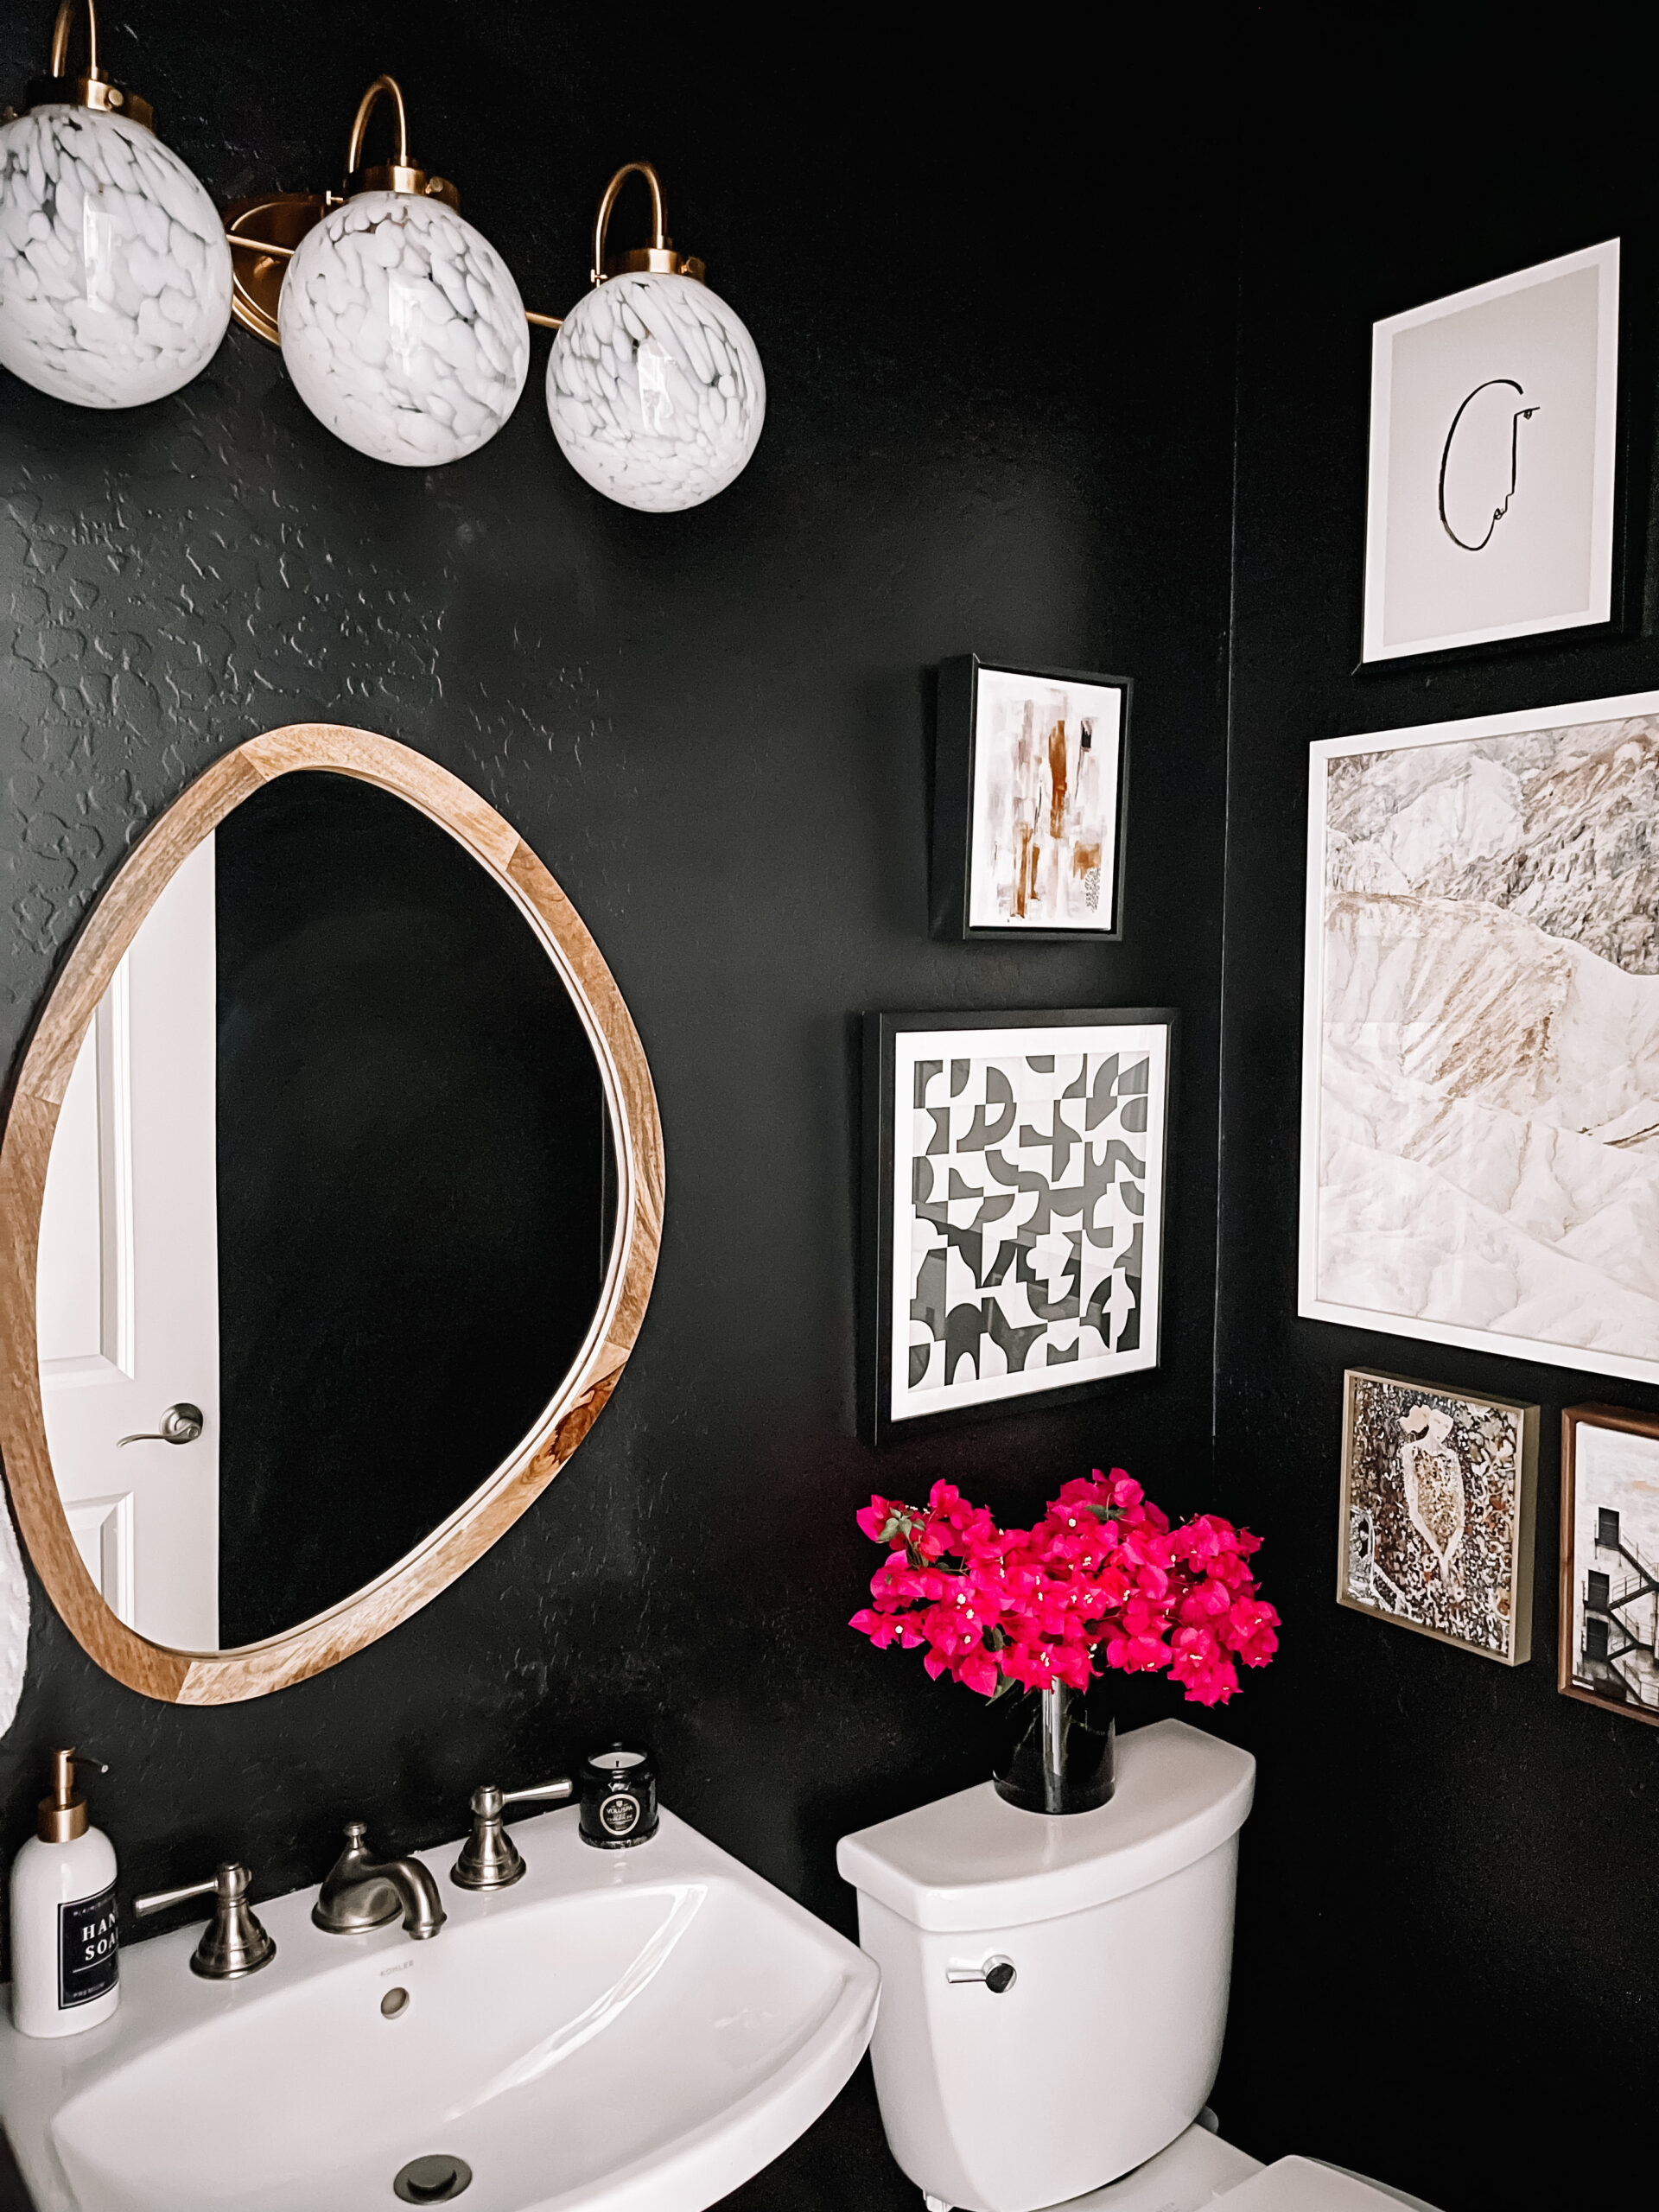 Powder Room Reveal - one room challenge - black walls and brass light - This is our Bliss